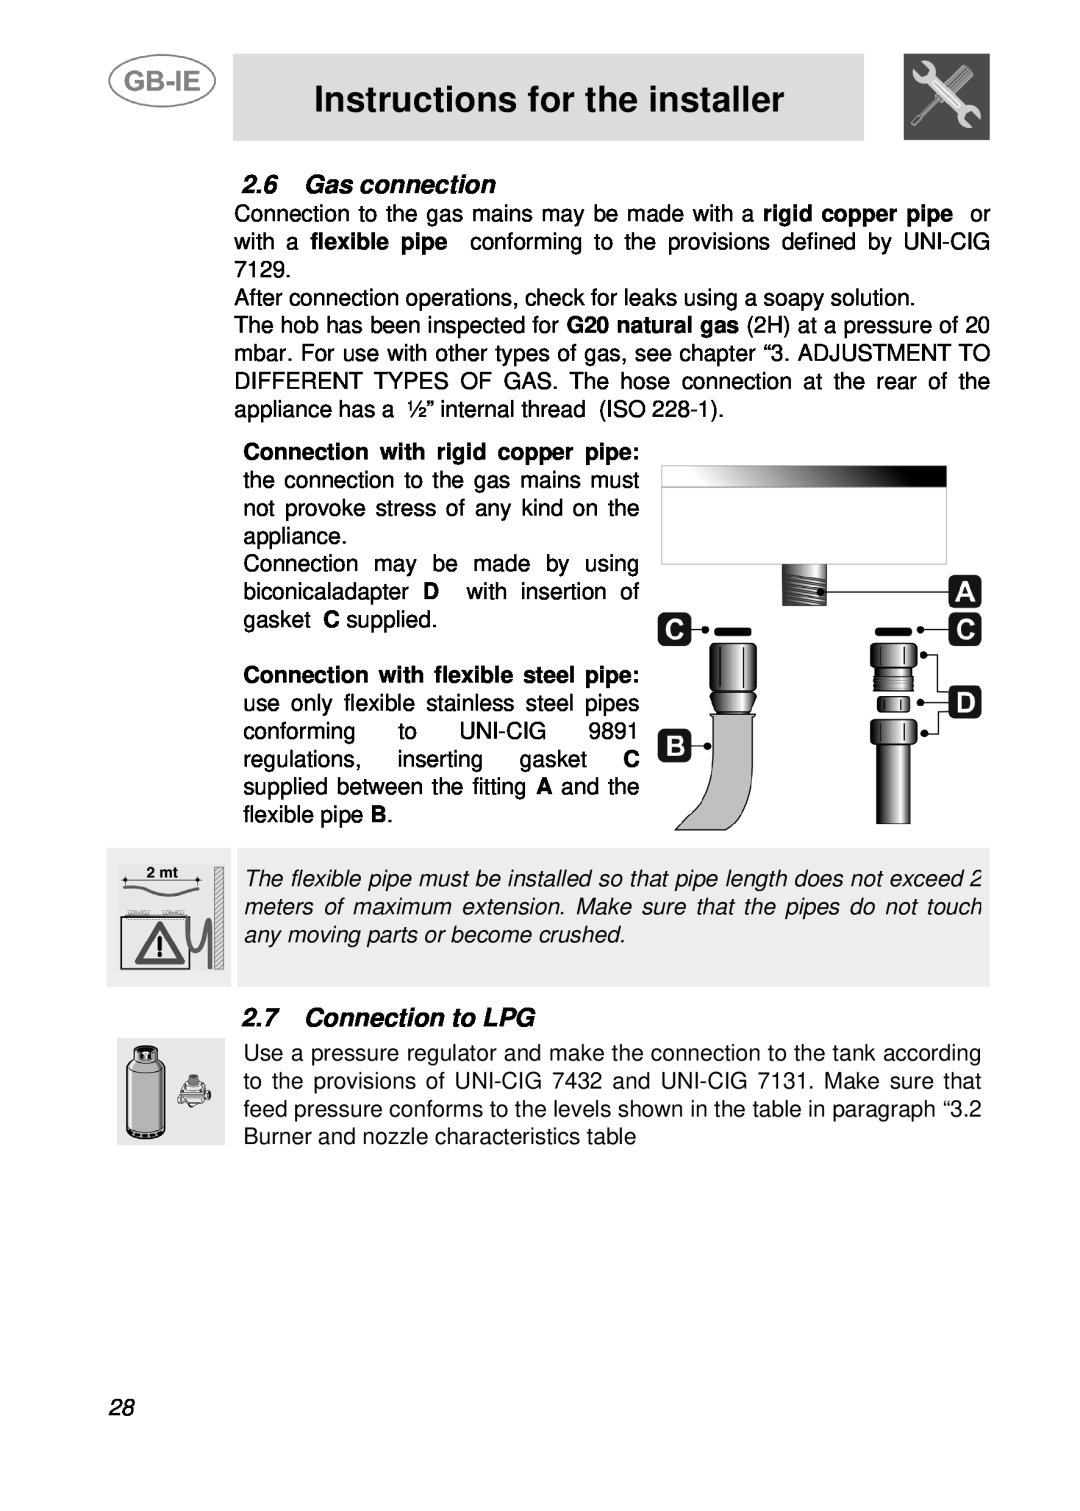 Smeg PGF95F-1 manual Gas connection, Connection to LPG, Instructions for the installer, Connection with rigid copper pipe 